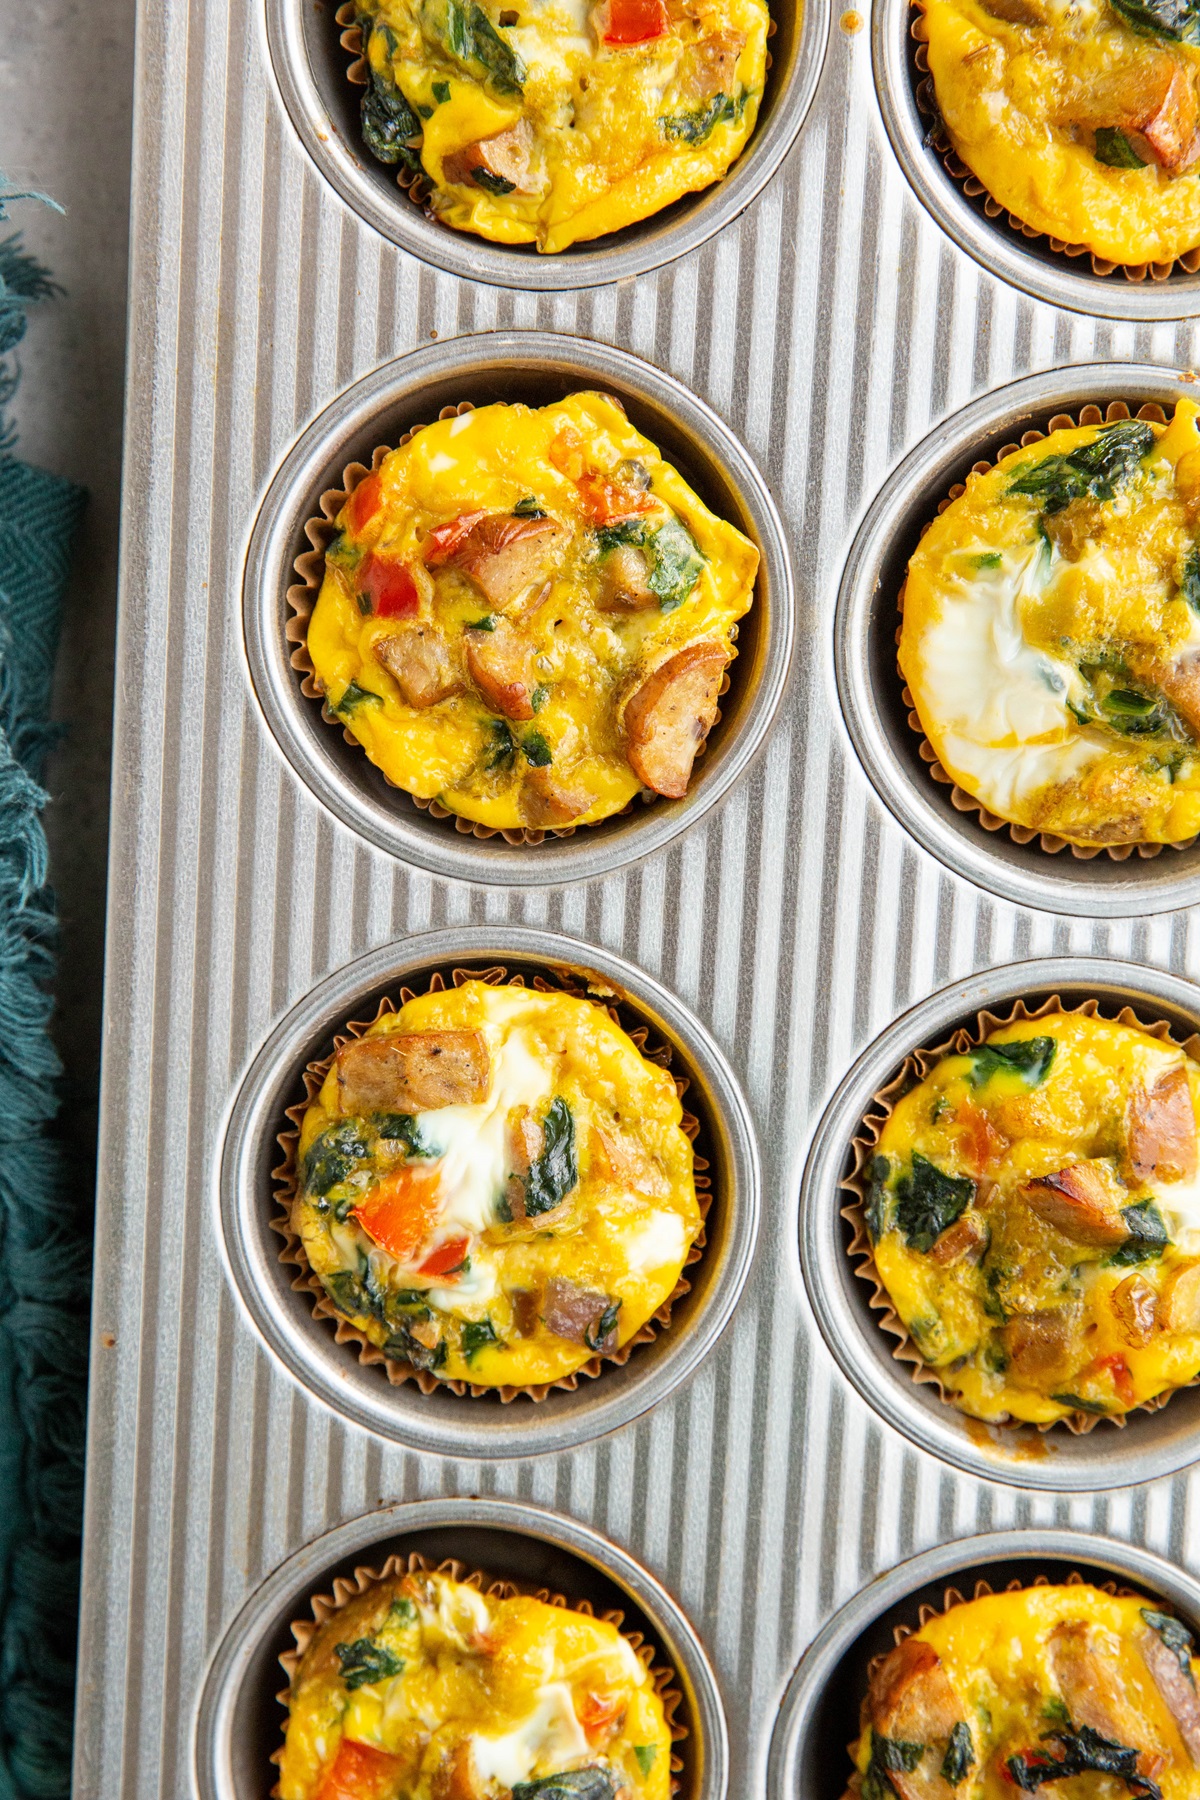 Muffin pan full of sausage egg muffins.